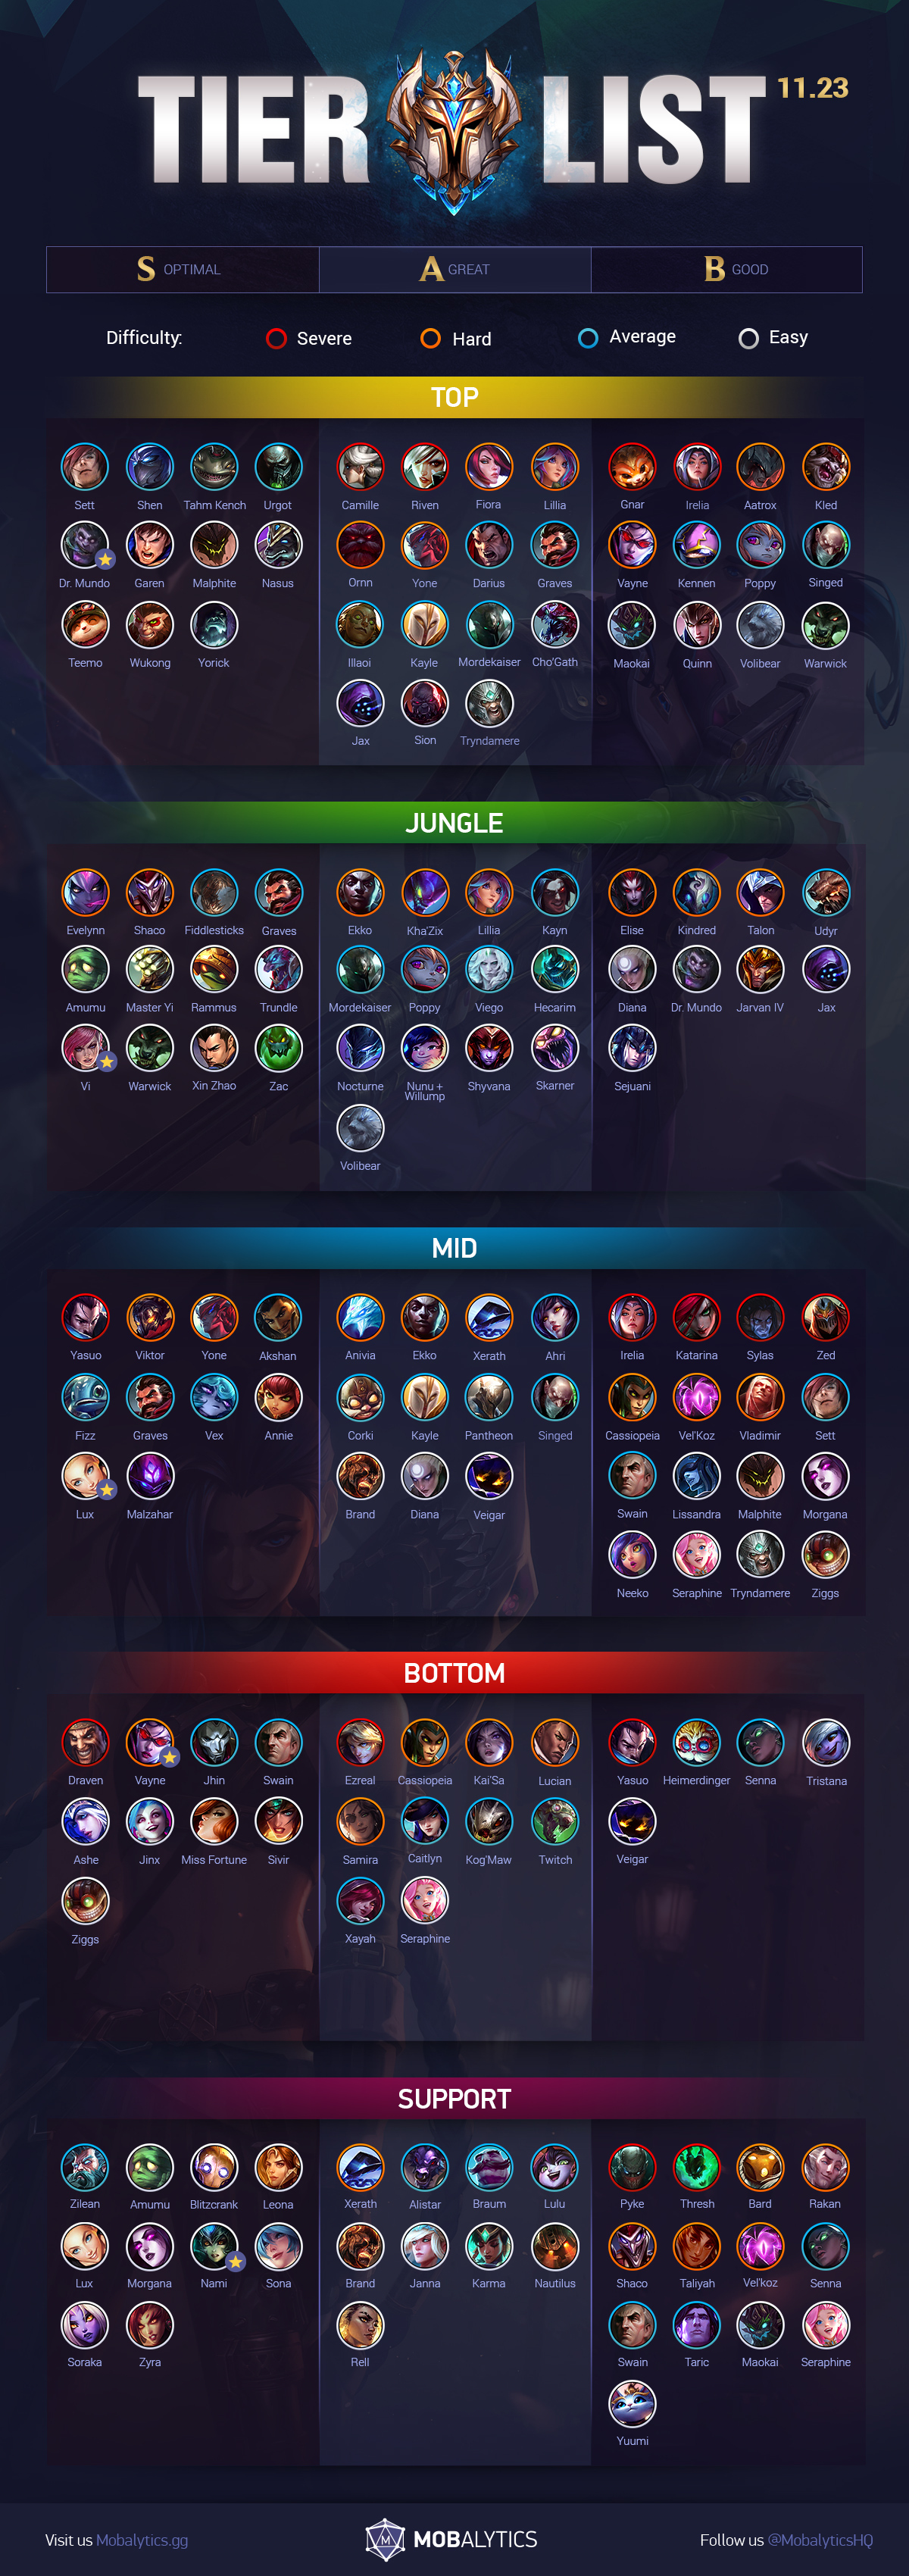 LoL Tier List Patch 11.23 updated